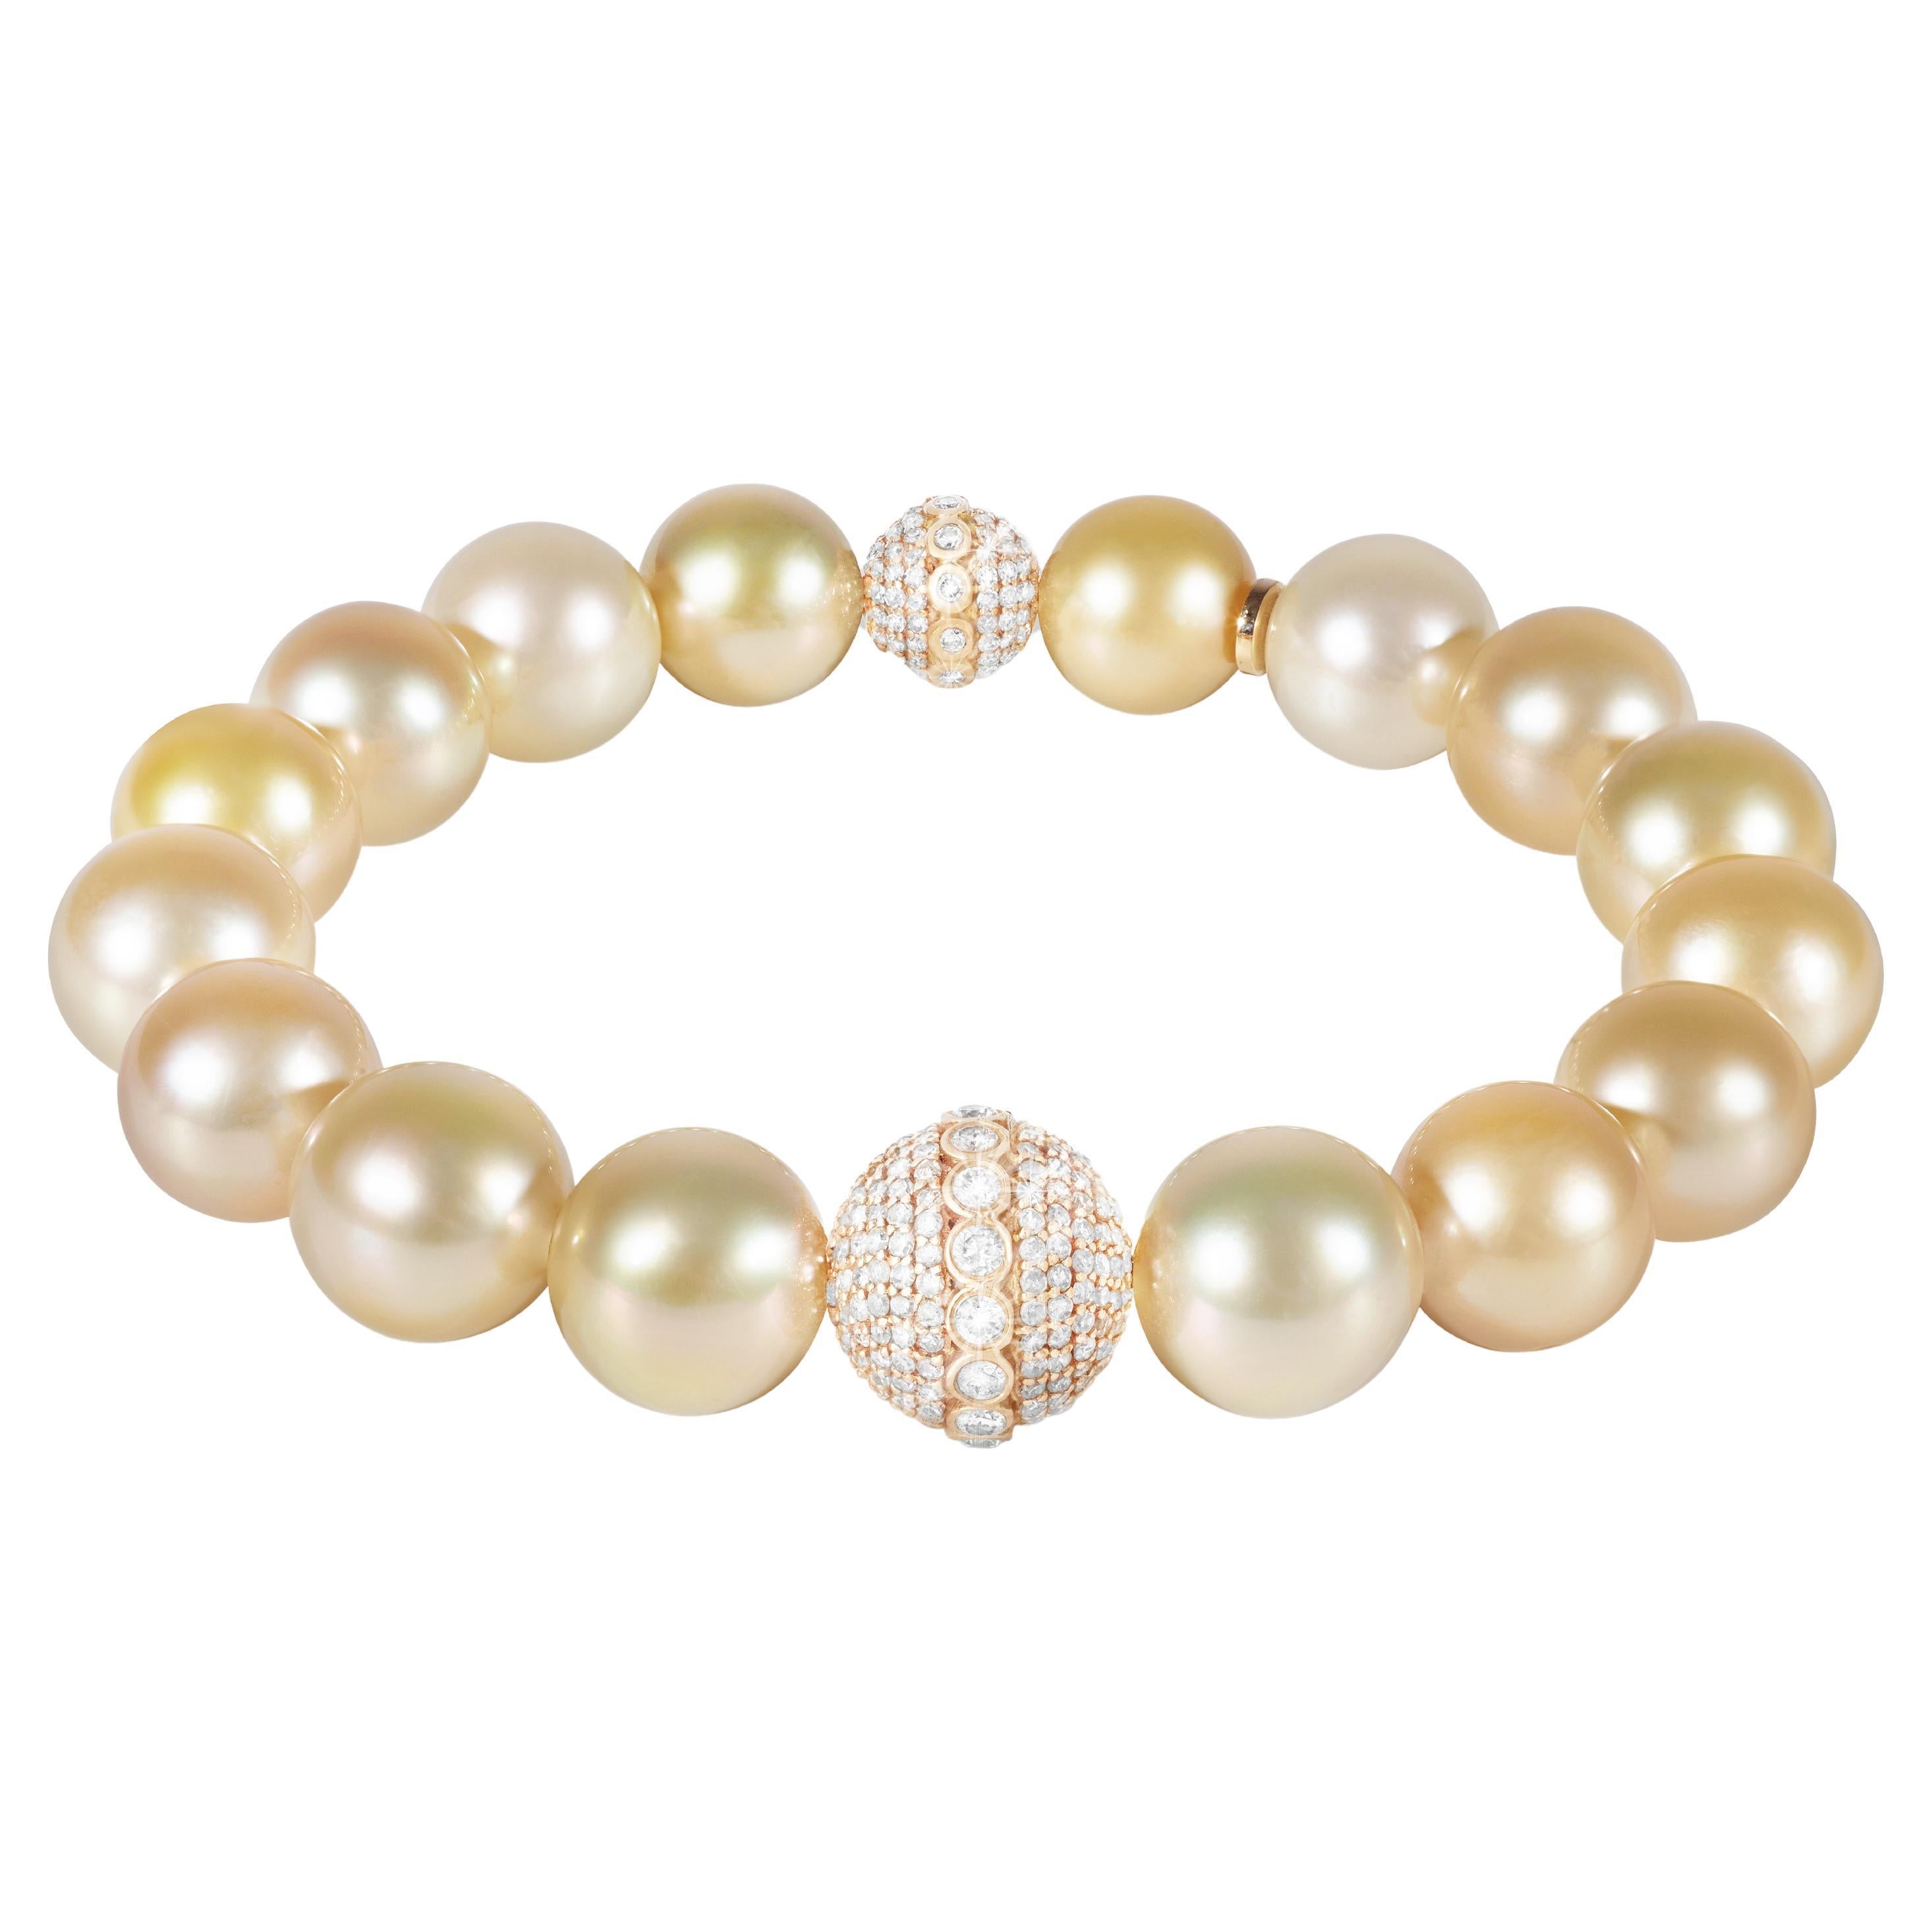 Golden South Sea Pearl Bracelet with 18k Yellow Gold Diamond Encrusted Orbs